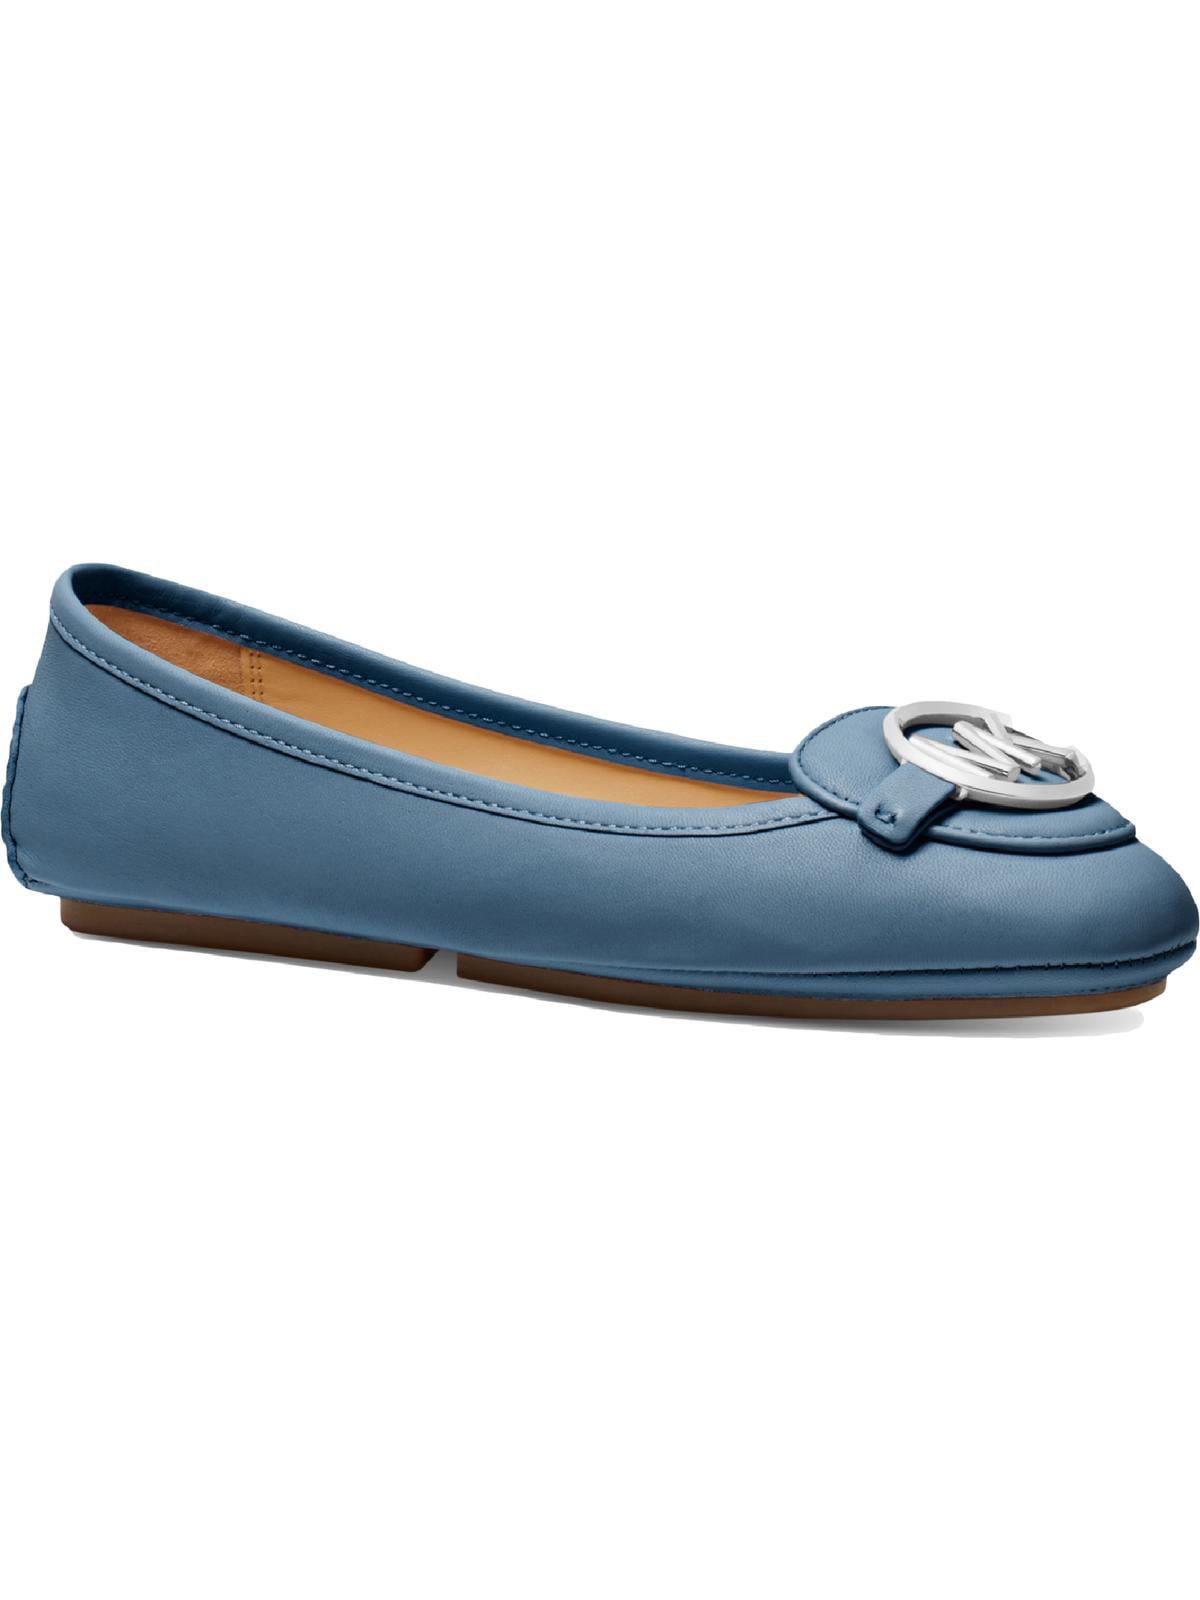 Buy MICHAEL Michael Kors Womens Lillie Leather Moccasins Blue 10 Medium B,M  Online at Lowest Price in Ubuy Nepal. 228370318